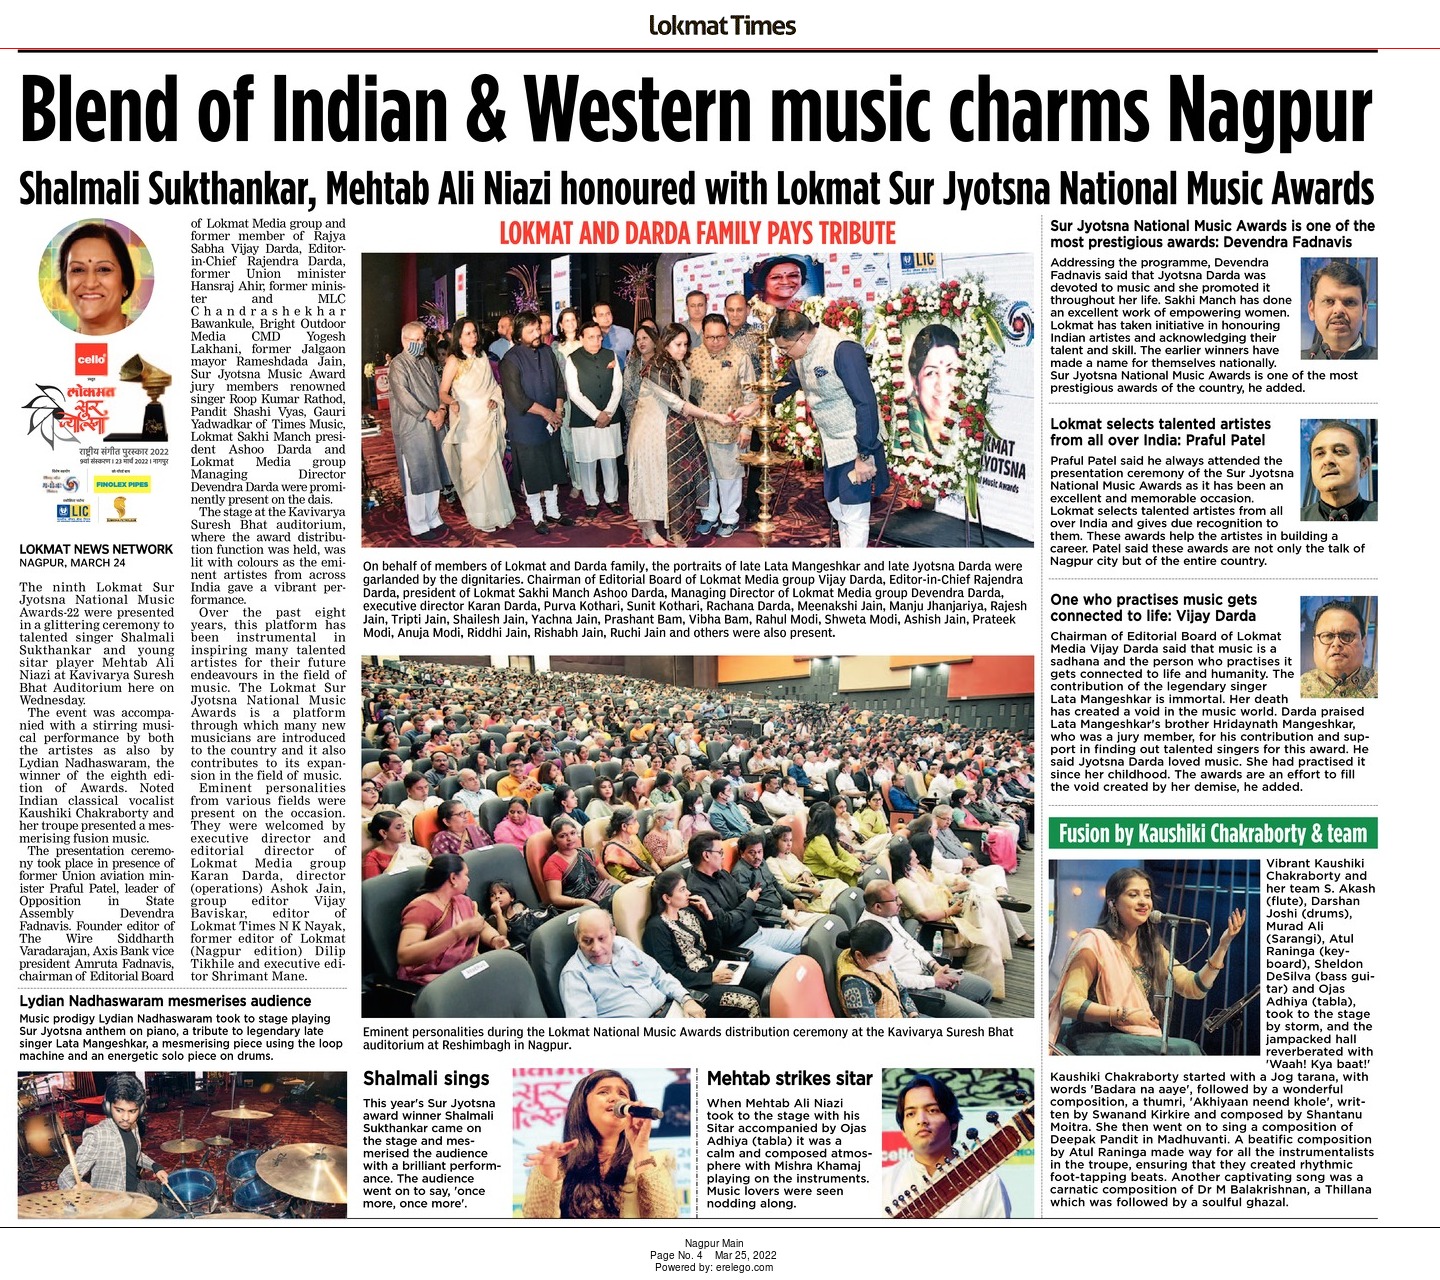 TBlend of Indian & Western music charms Nagpur